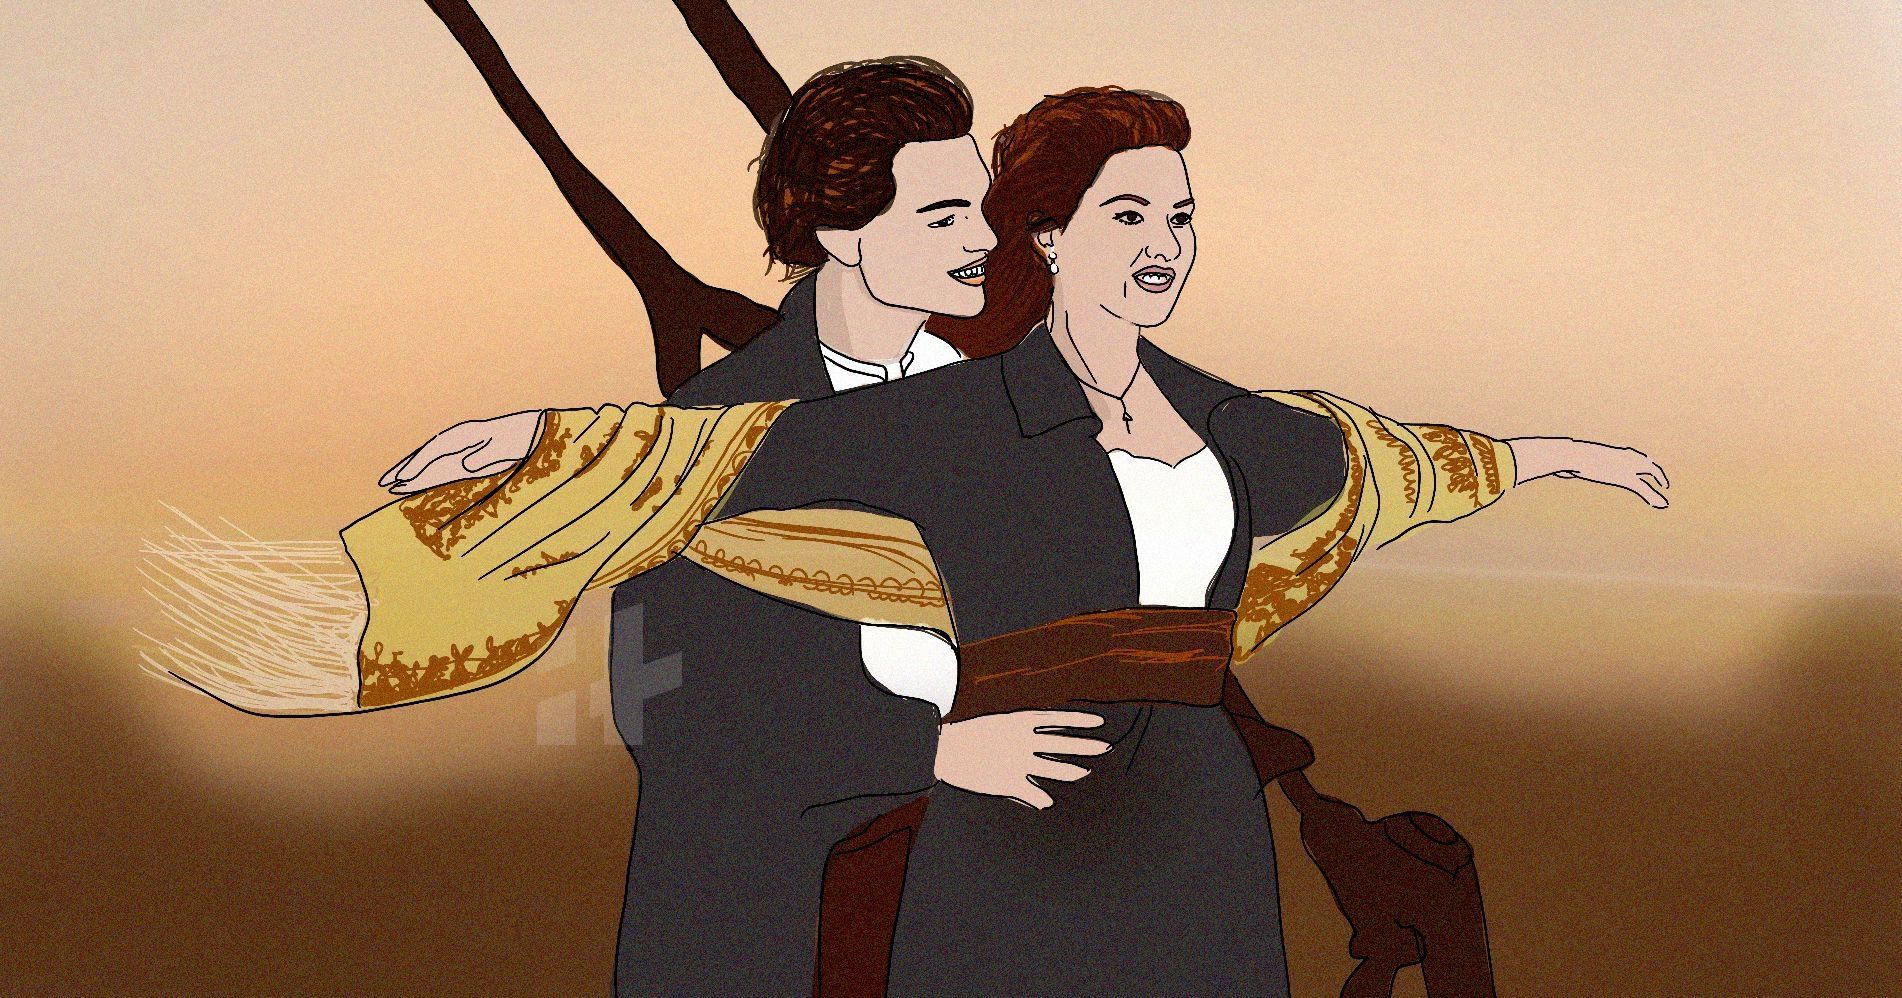 10 Questions About Titanic You're Embarrassed To Ask (But May Be Wondering)